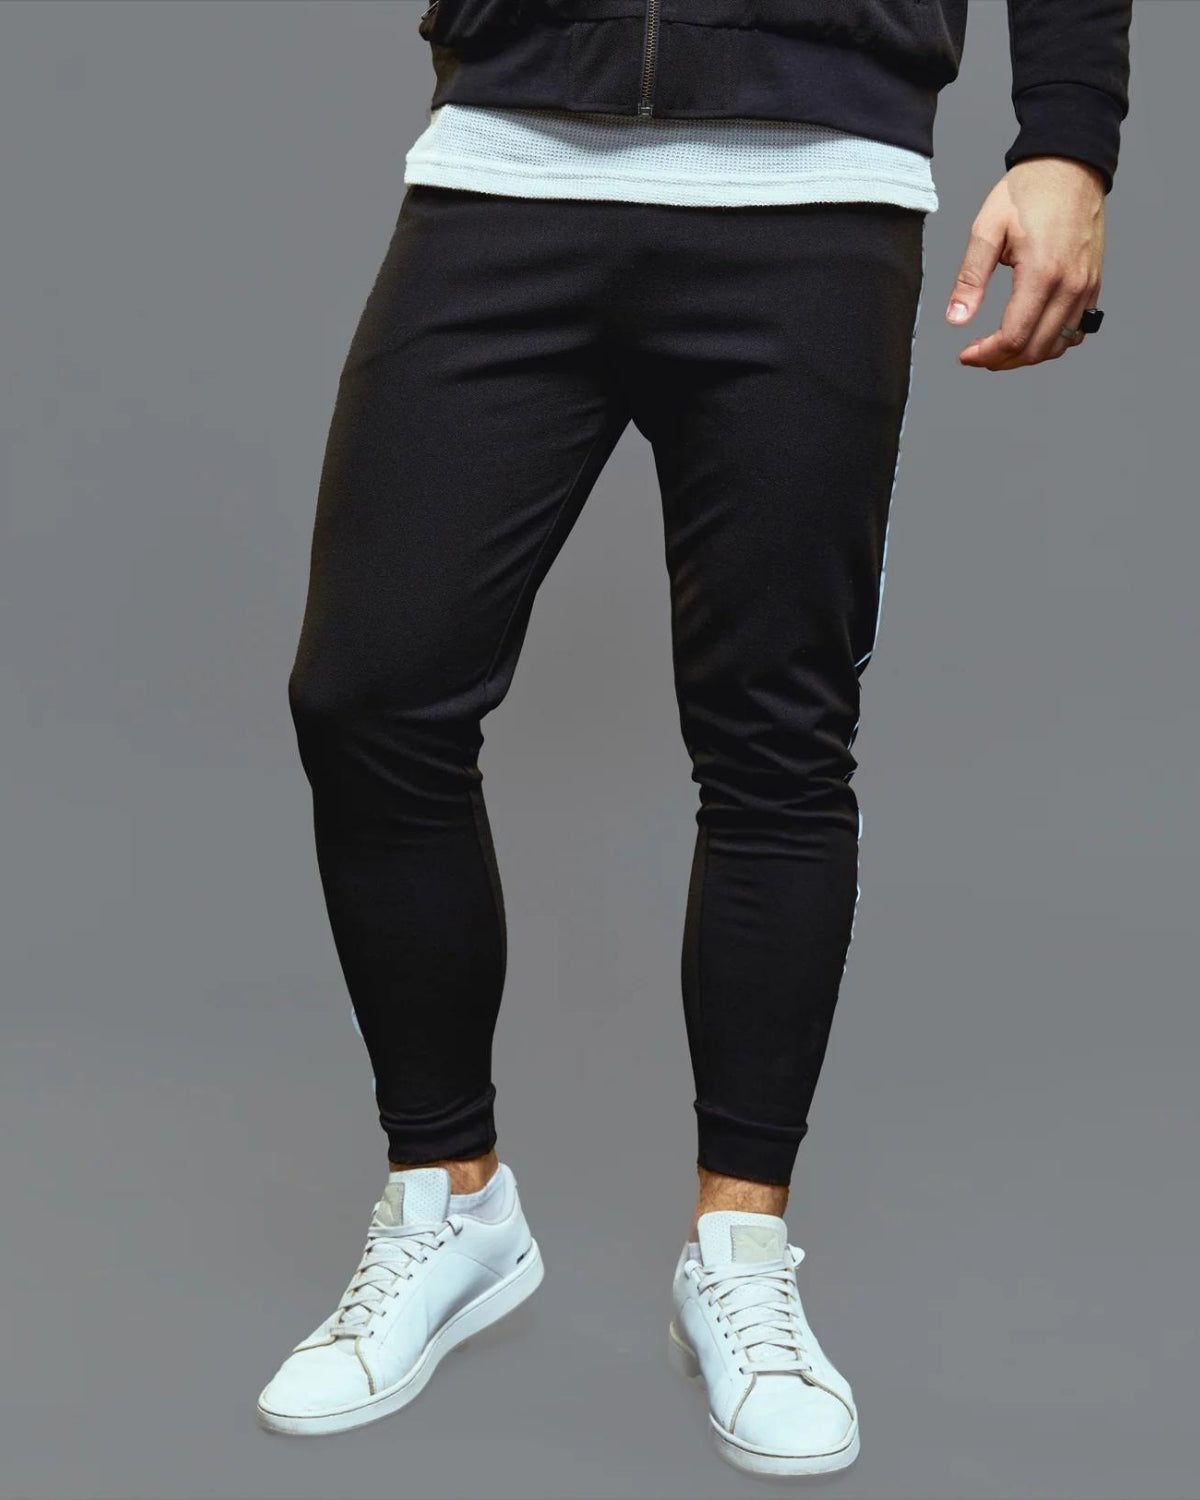 Unisex Tight Fitted Jogger - Black Shadow